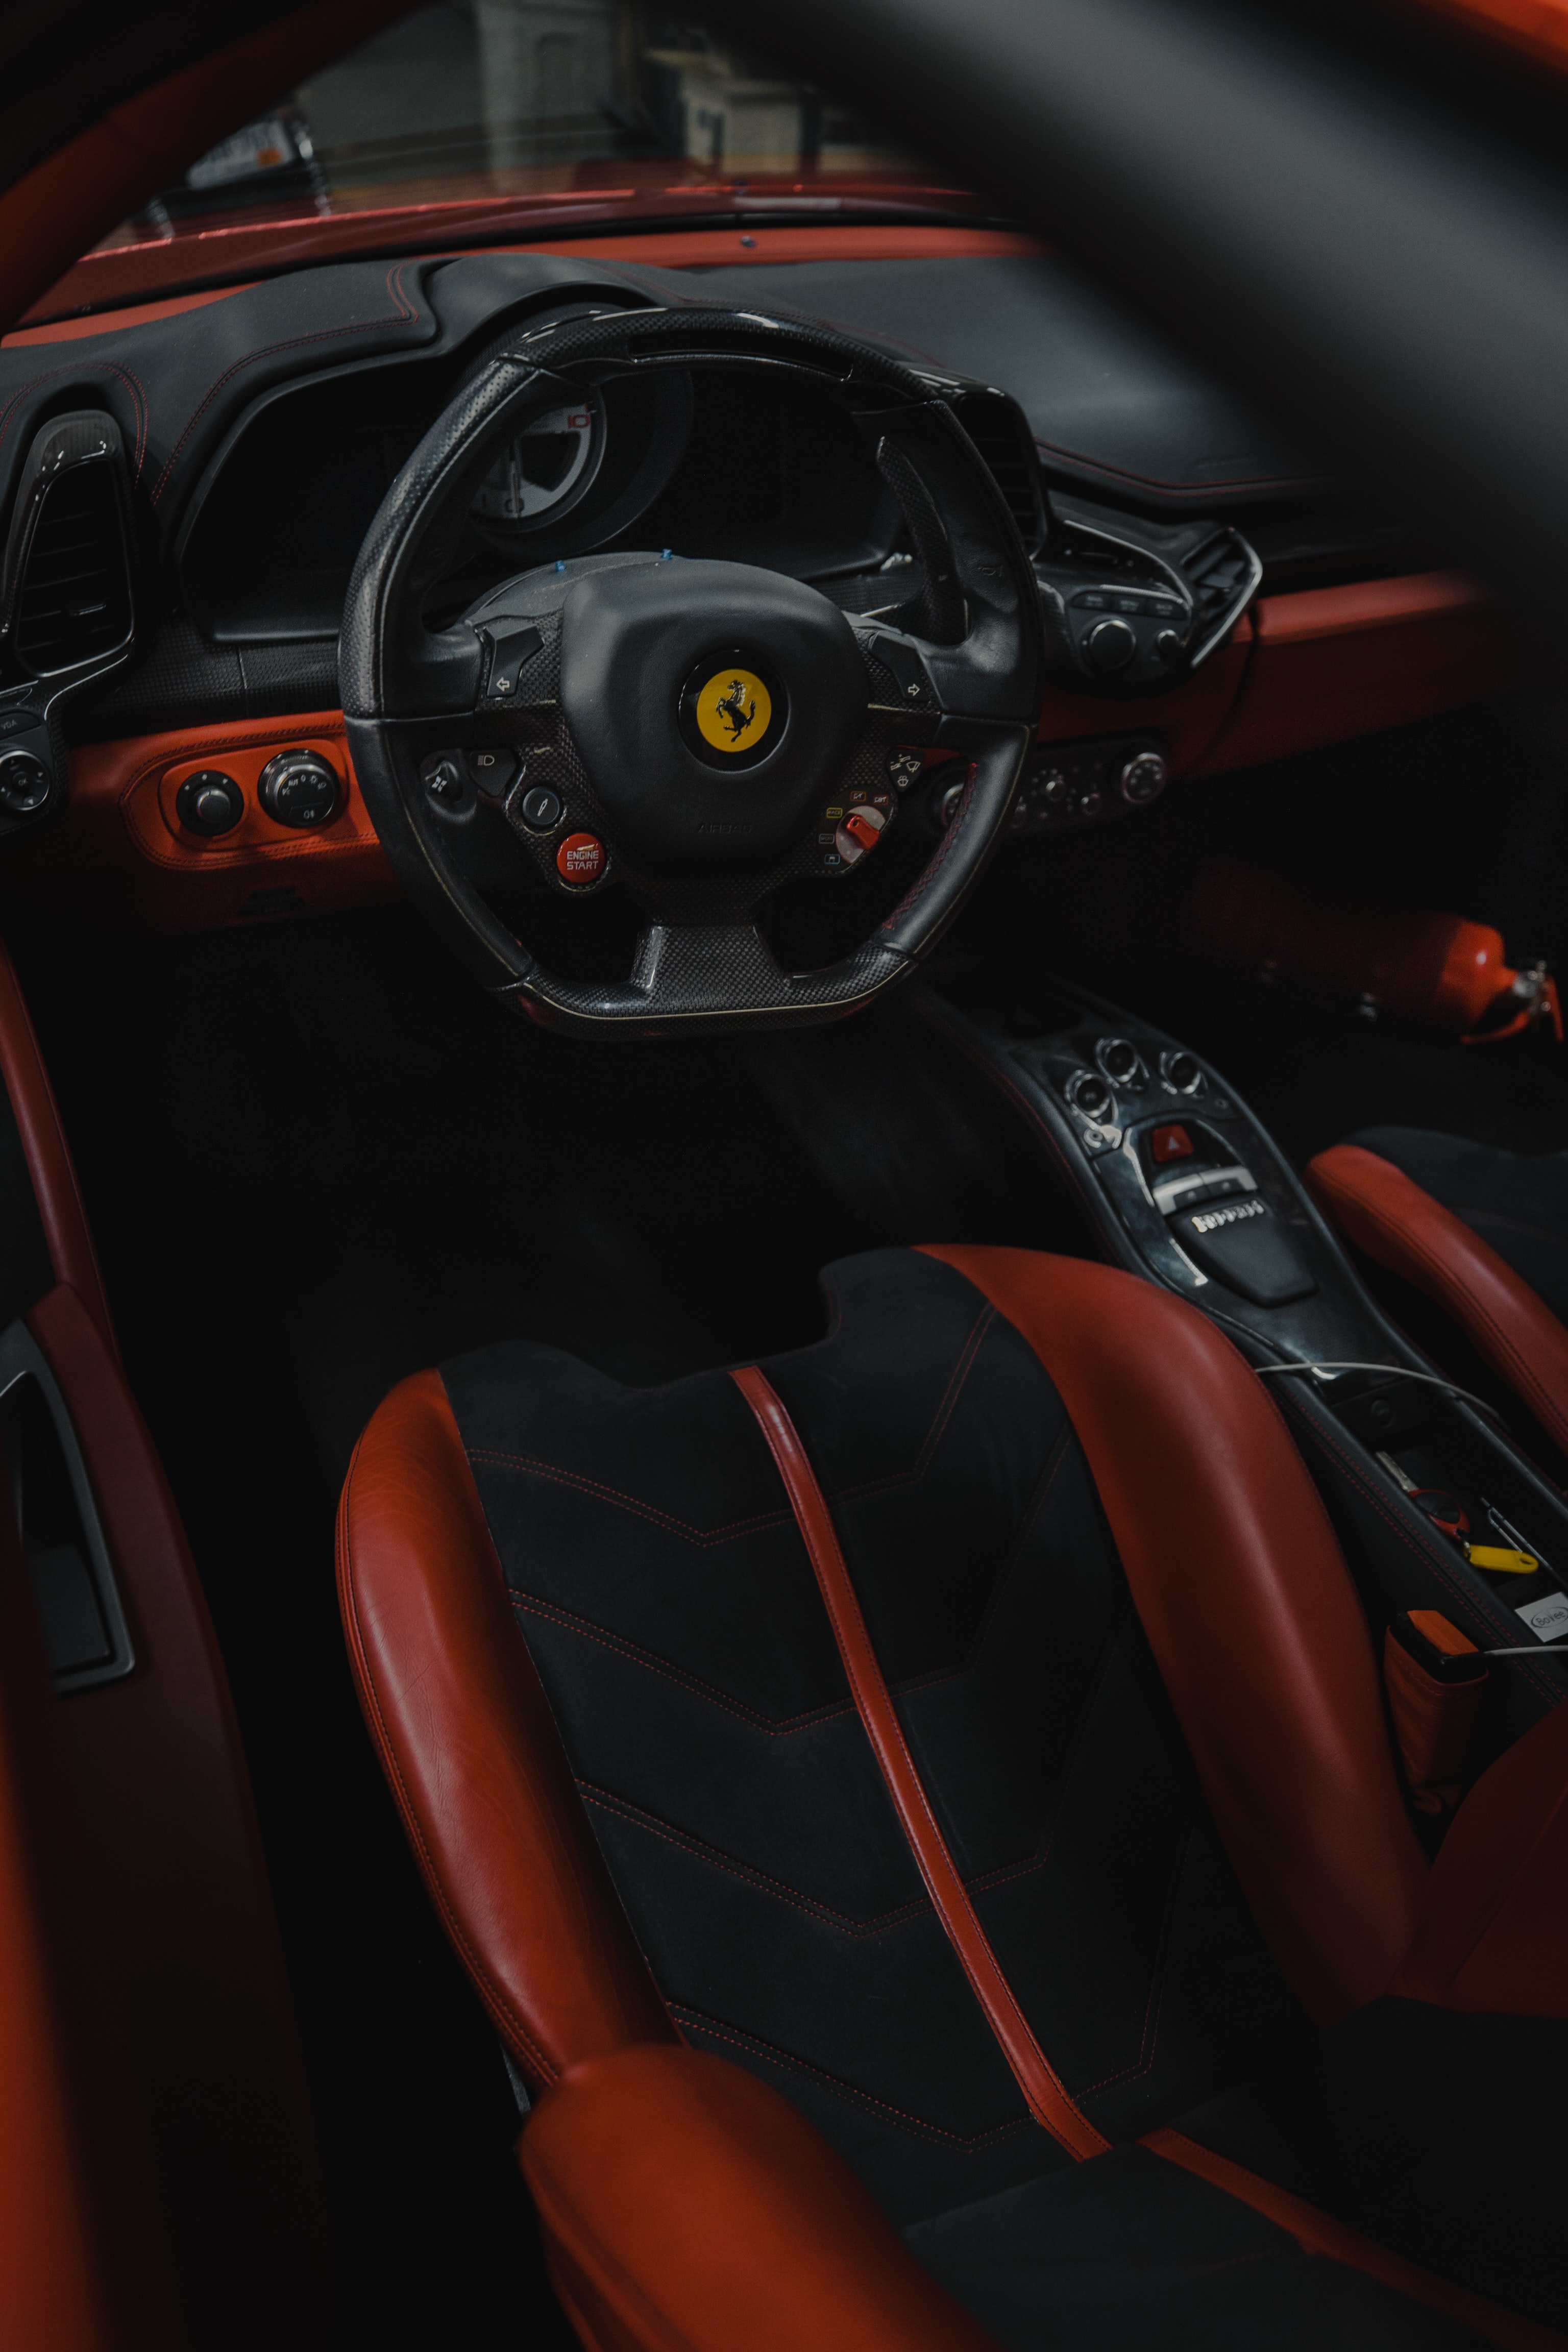 132943 Screensavers and Wallpapers Steering Wheel for phone. Download ferrari, seat, cars, red, car, steering wheel, rudder, salon, sitting pictures for free